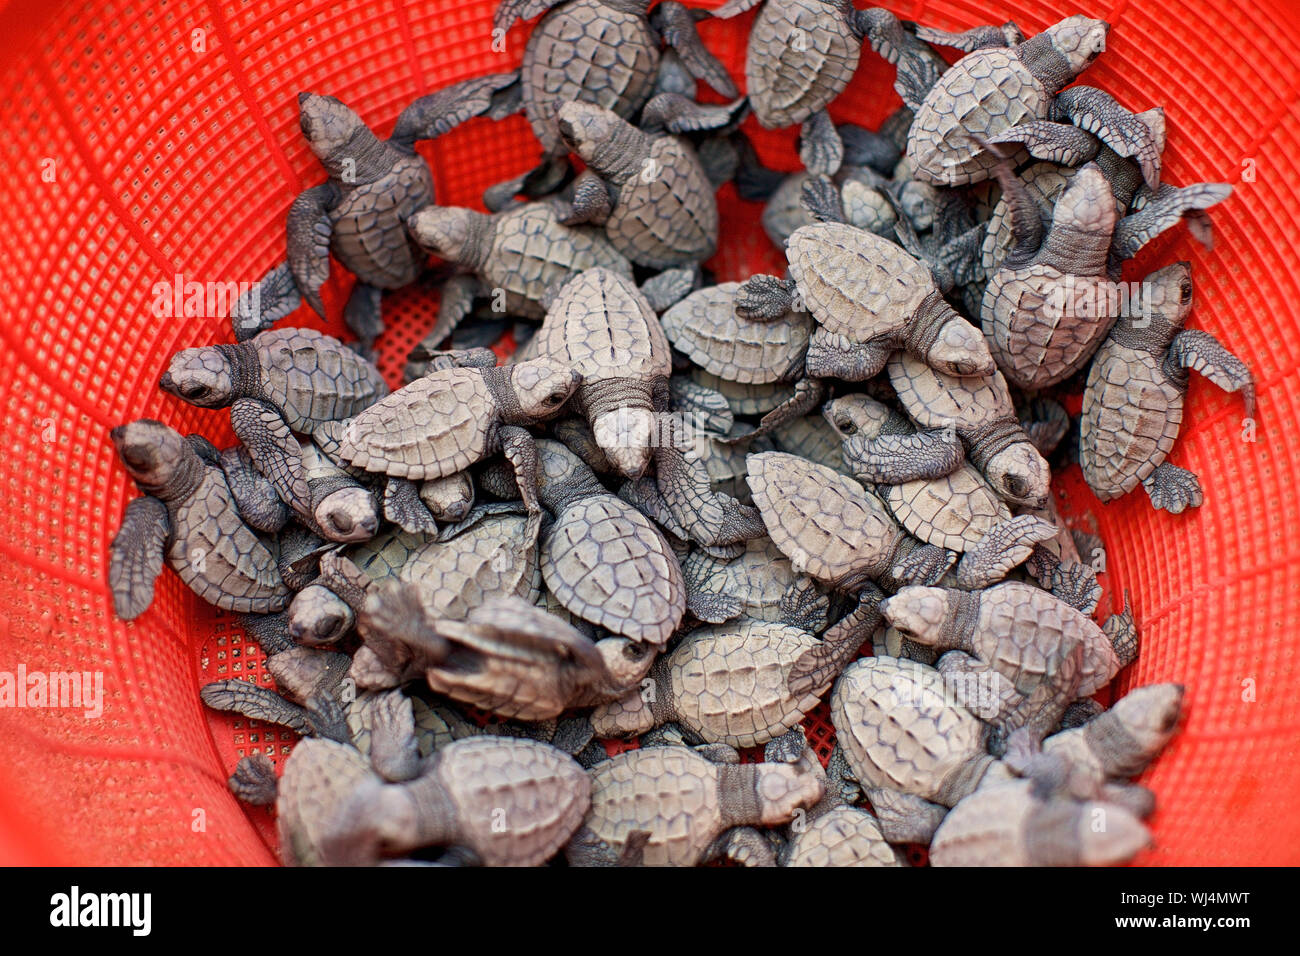 Baby turtles in red strainer Stock Photo